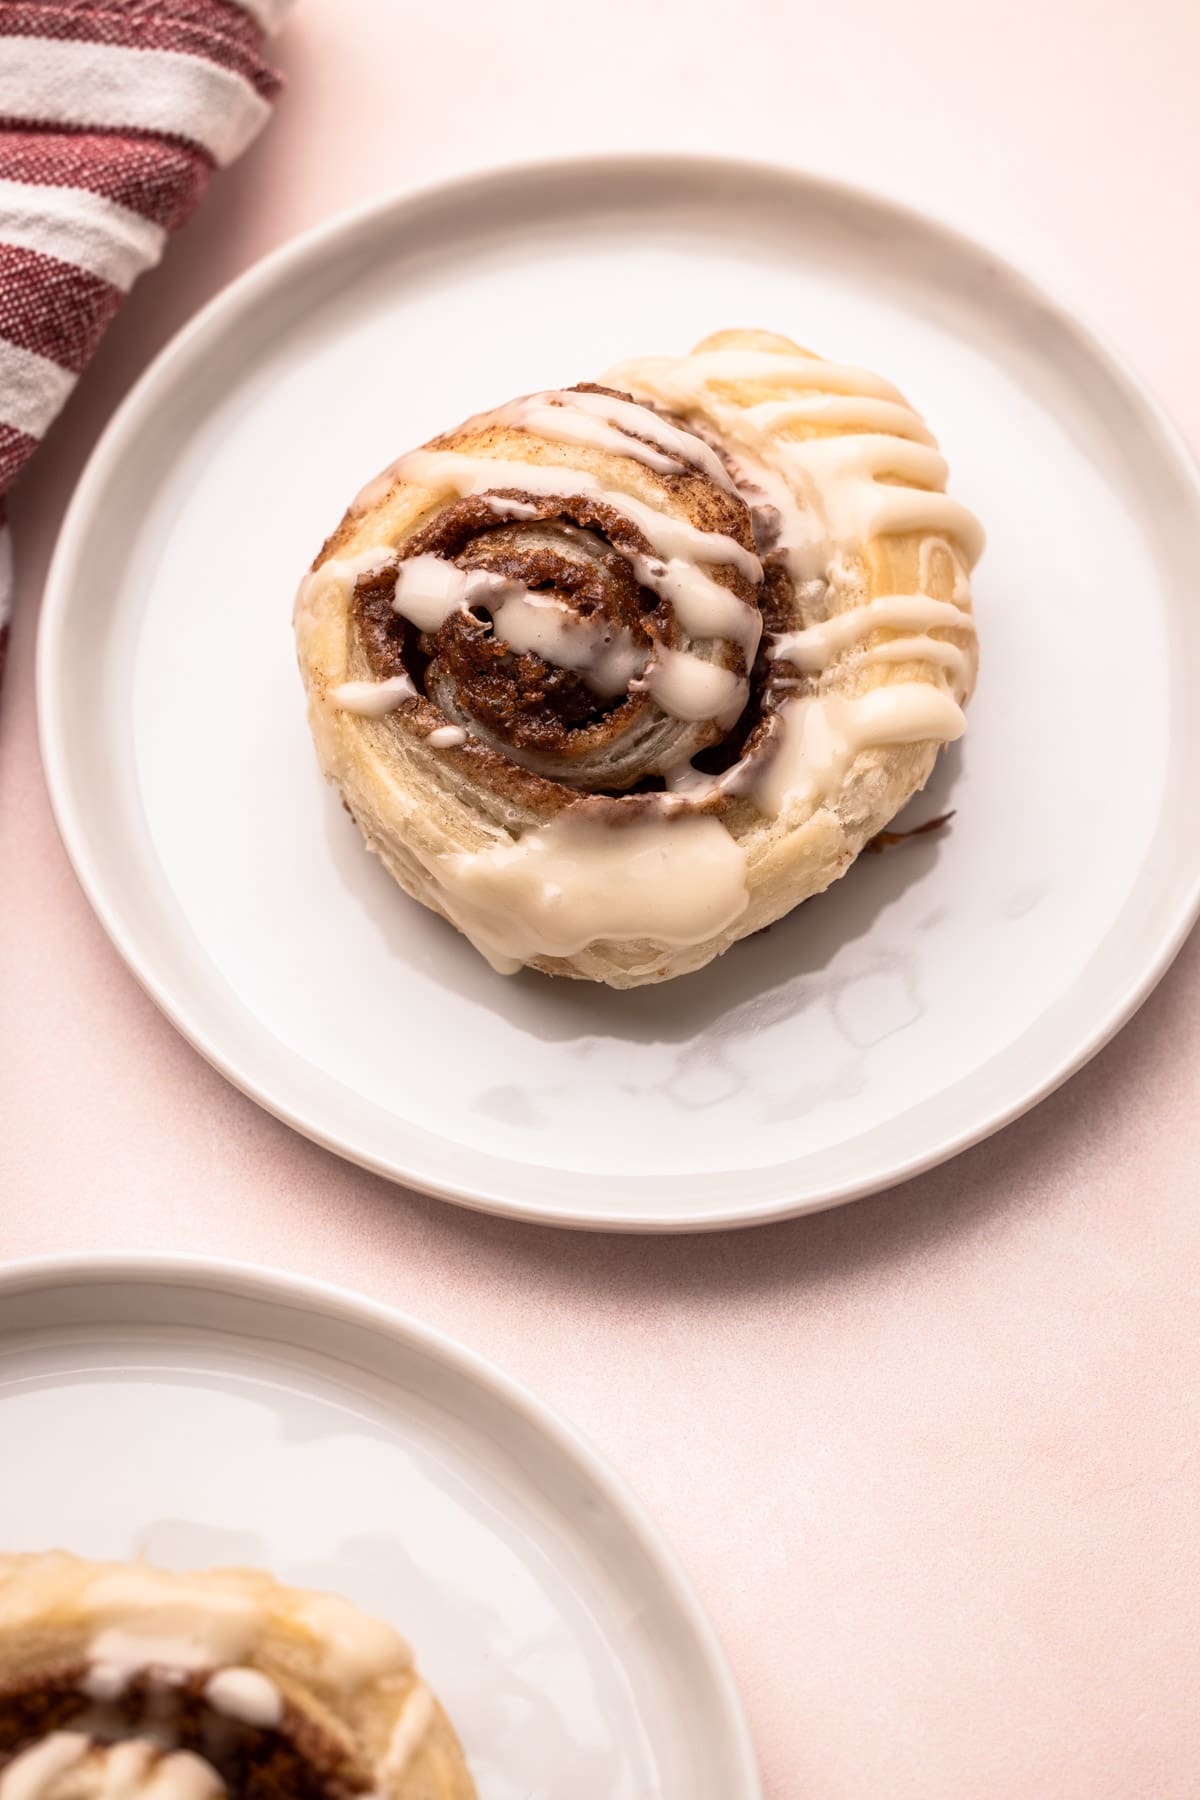 A baked and glazed puff pastry cinnamon roll on a plate.